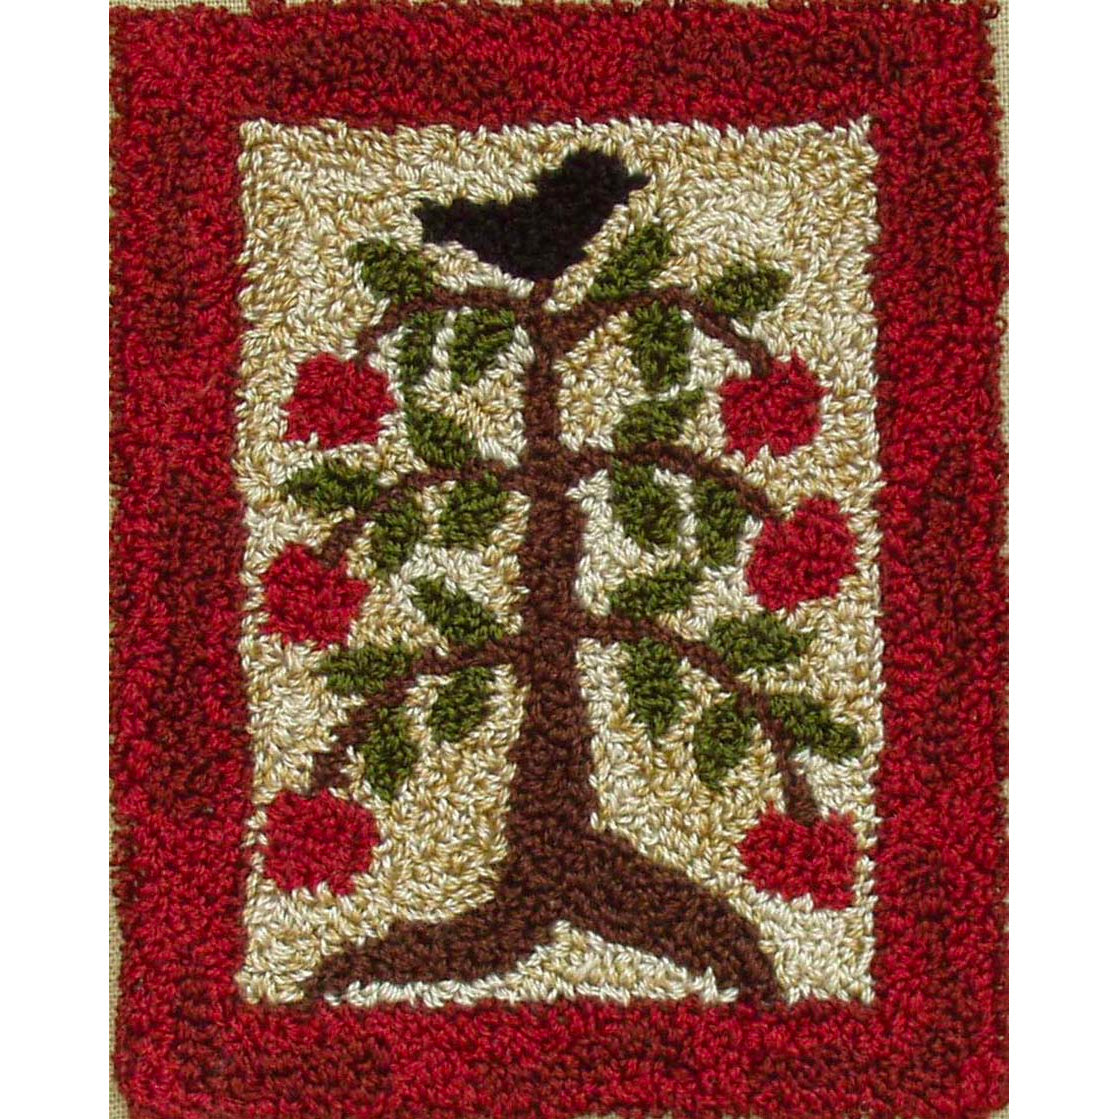 Apple Tree Punch Needle Embroidery Kit - Stitched Modern